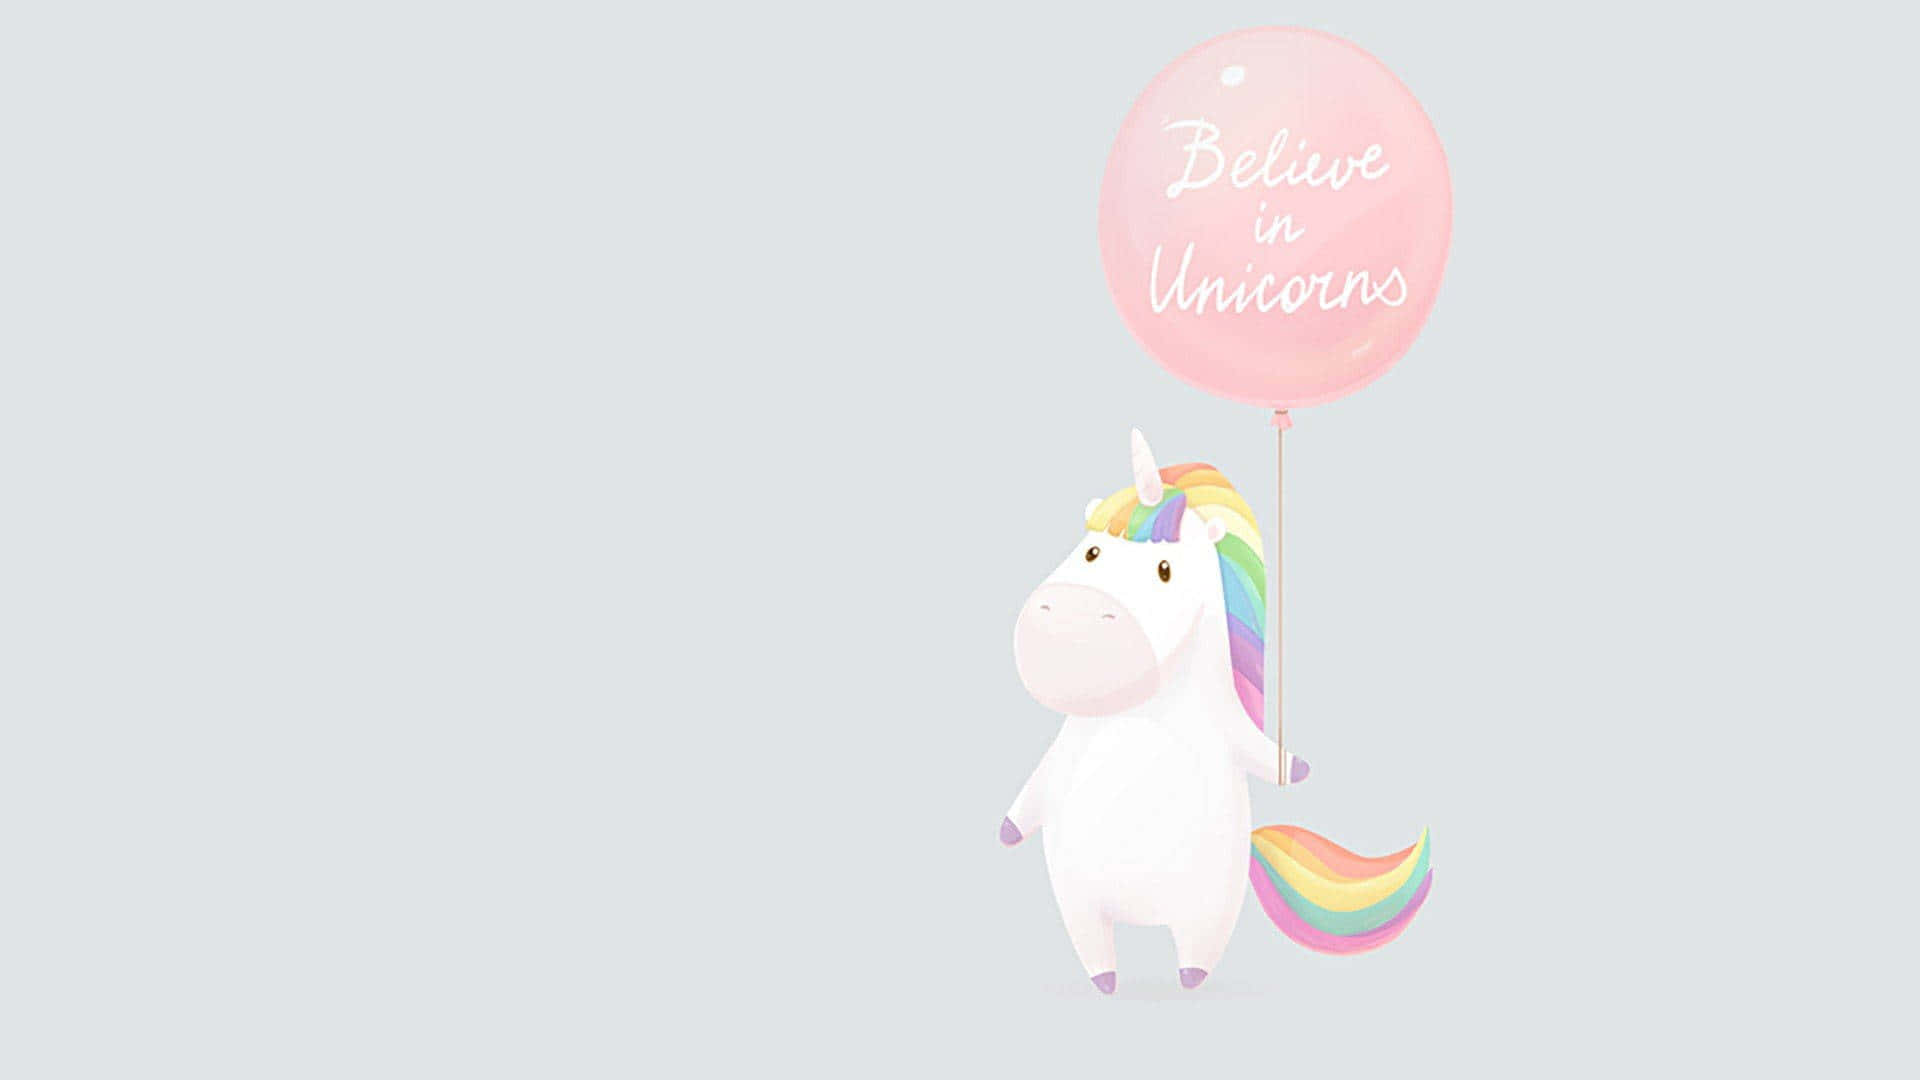 "Catch a ride to magical places with a Lisa Frank unicorn!" Wallpaper